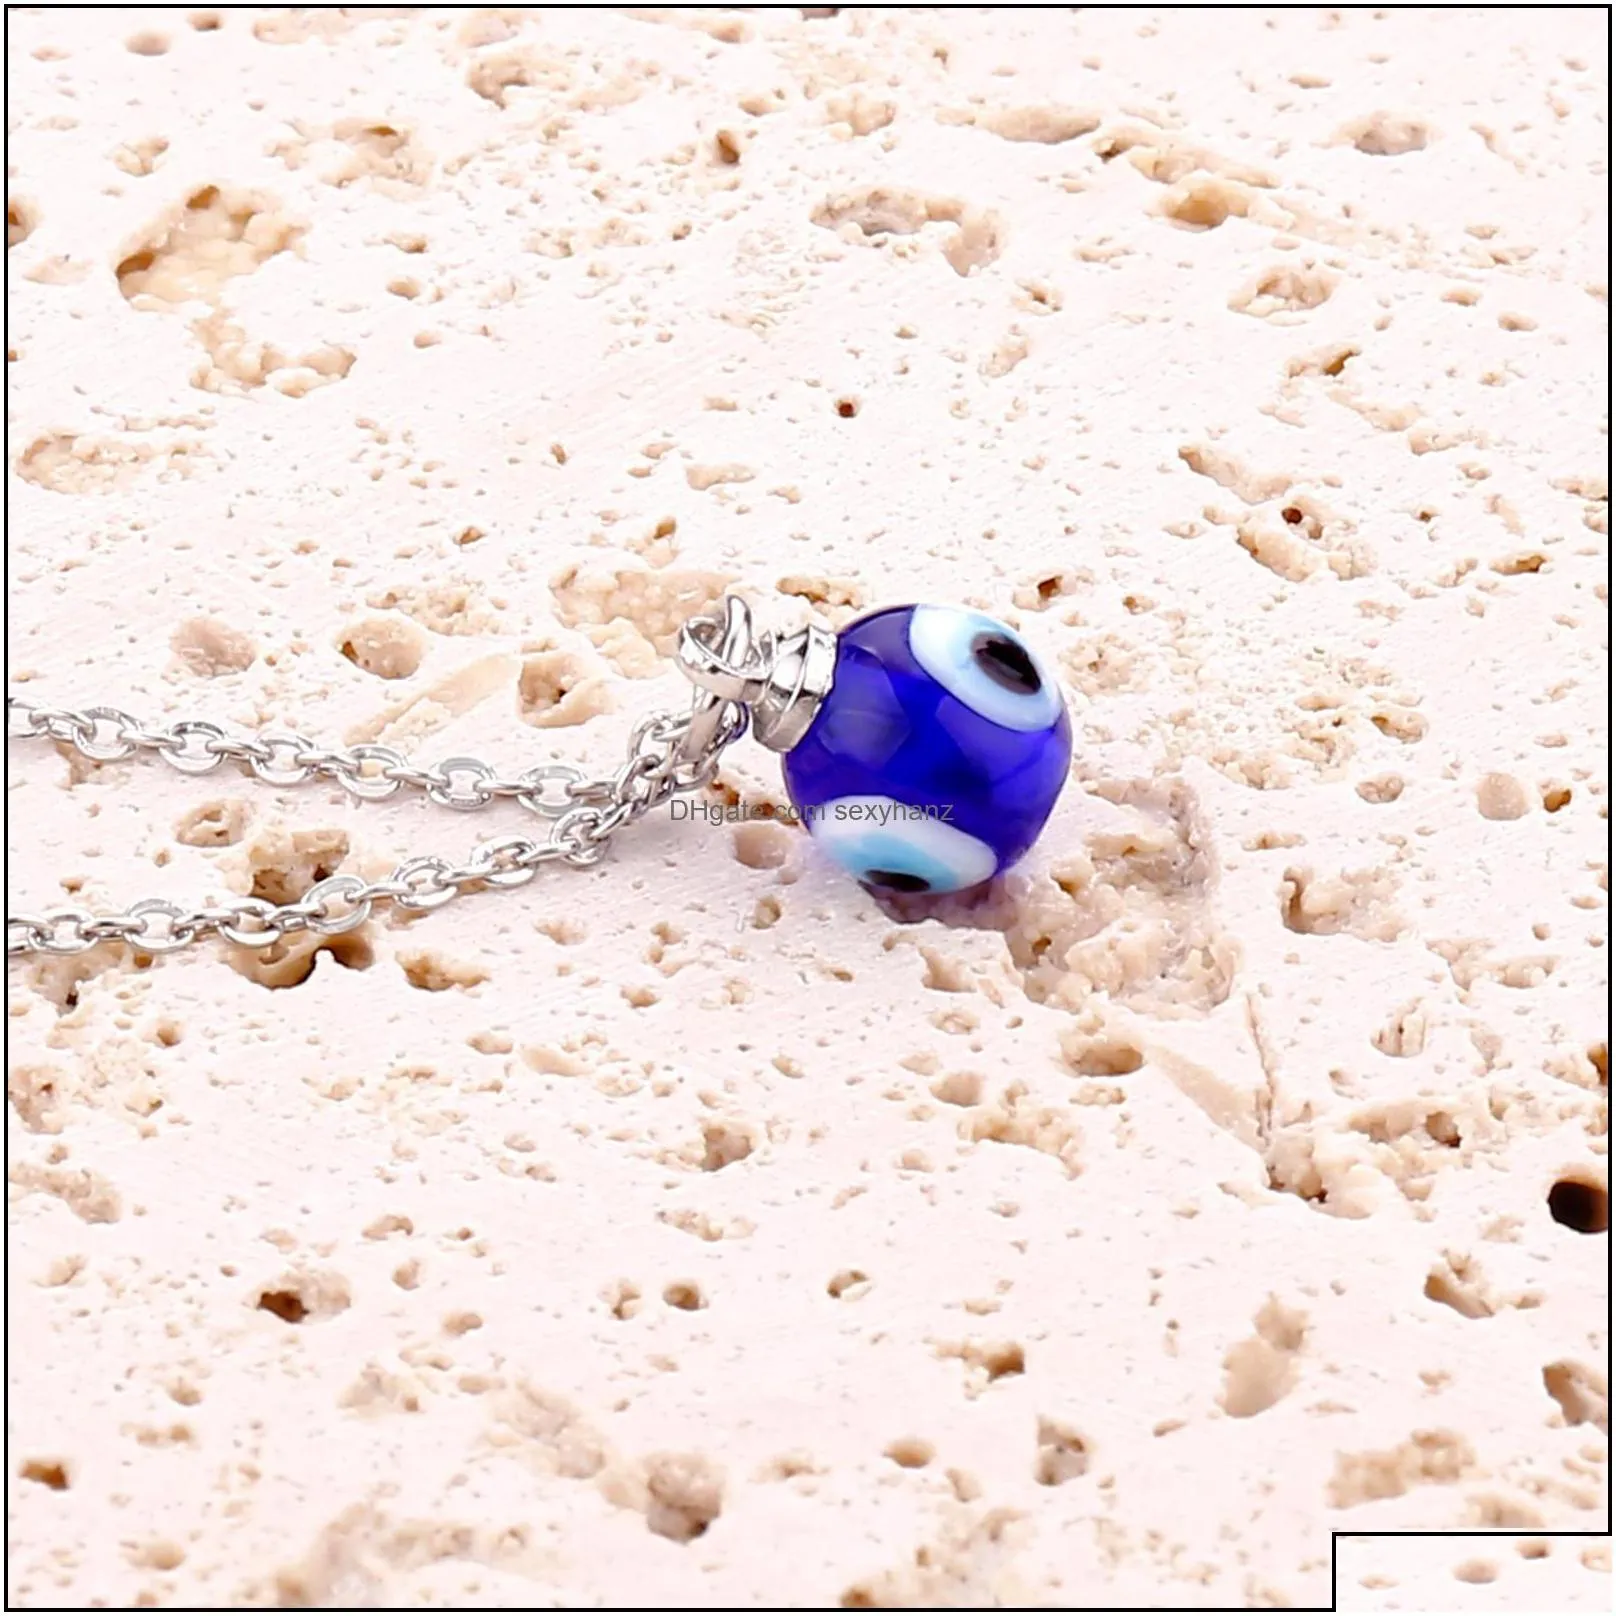 pendant necklaces pendants jewelry evil eye chain necklace blue eyes amet ojo turco kabh protection dhs97